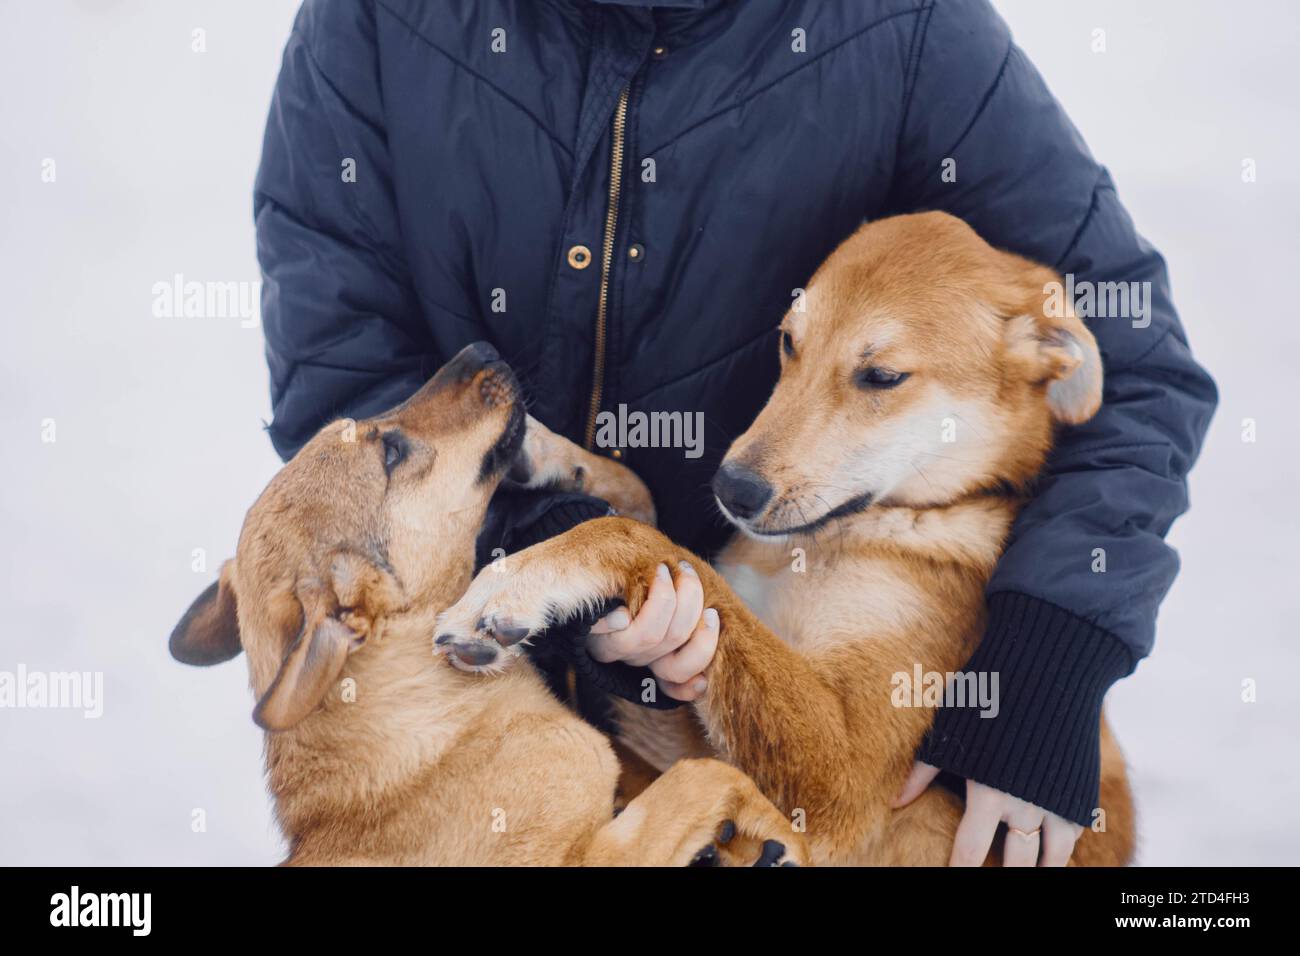 Two homeless cute mongrel dogs hugging with their owner in a dog shelter Stock Photo